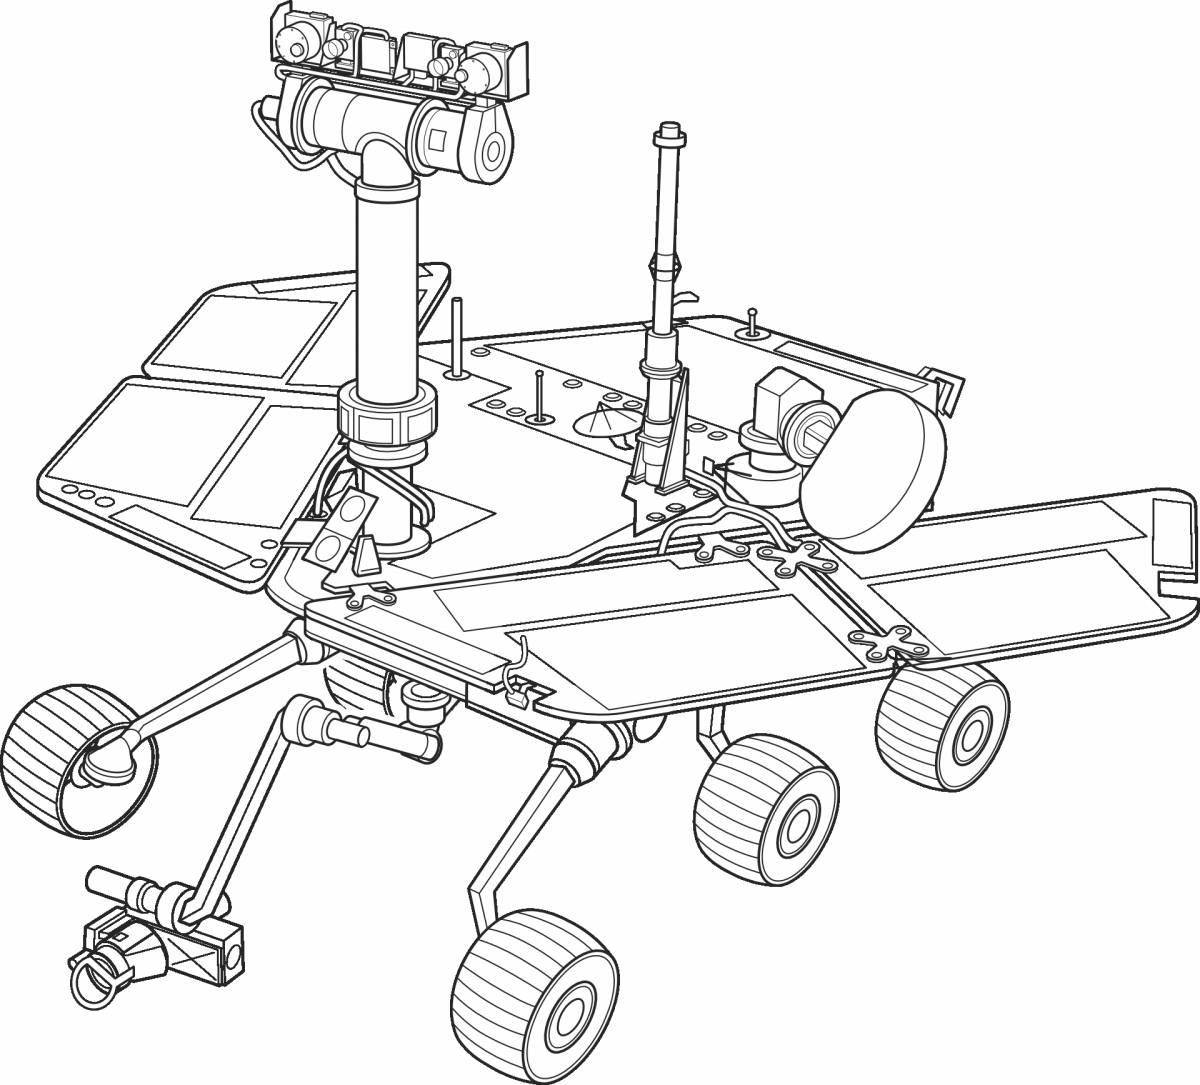 Charming moon rover coloring page